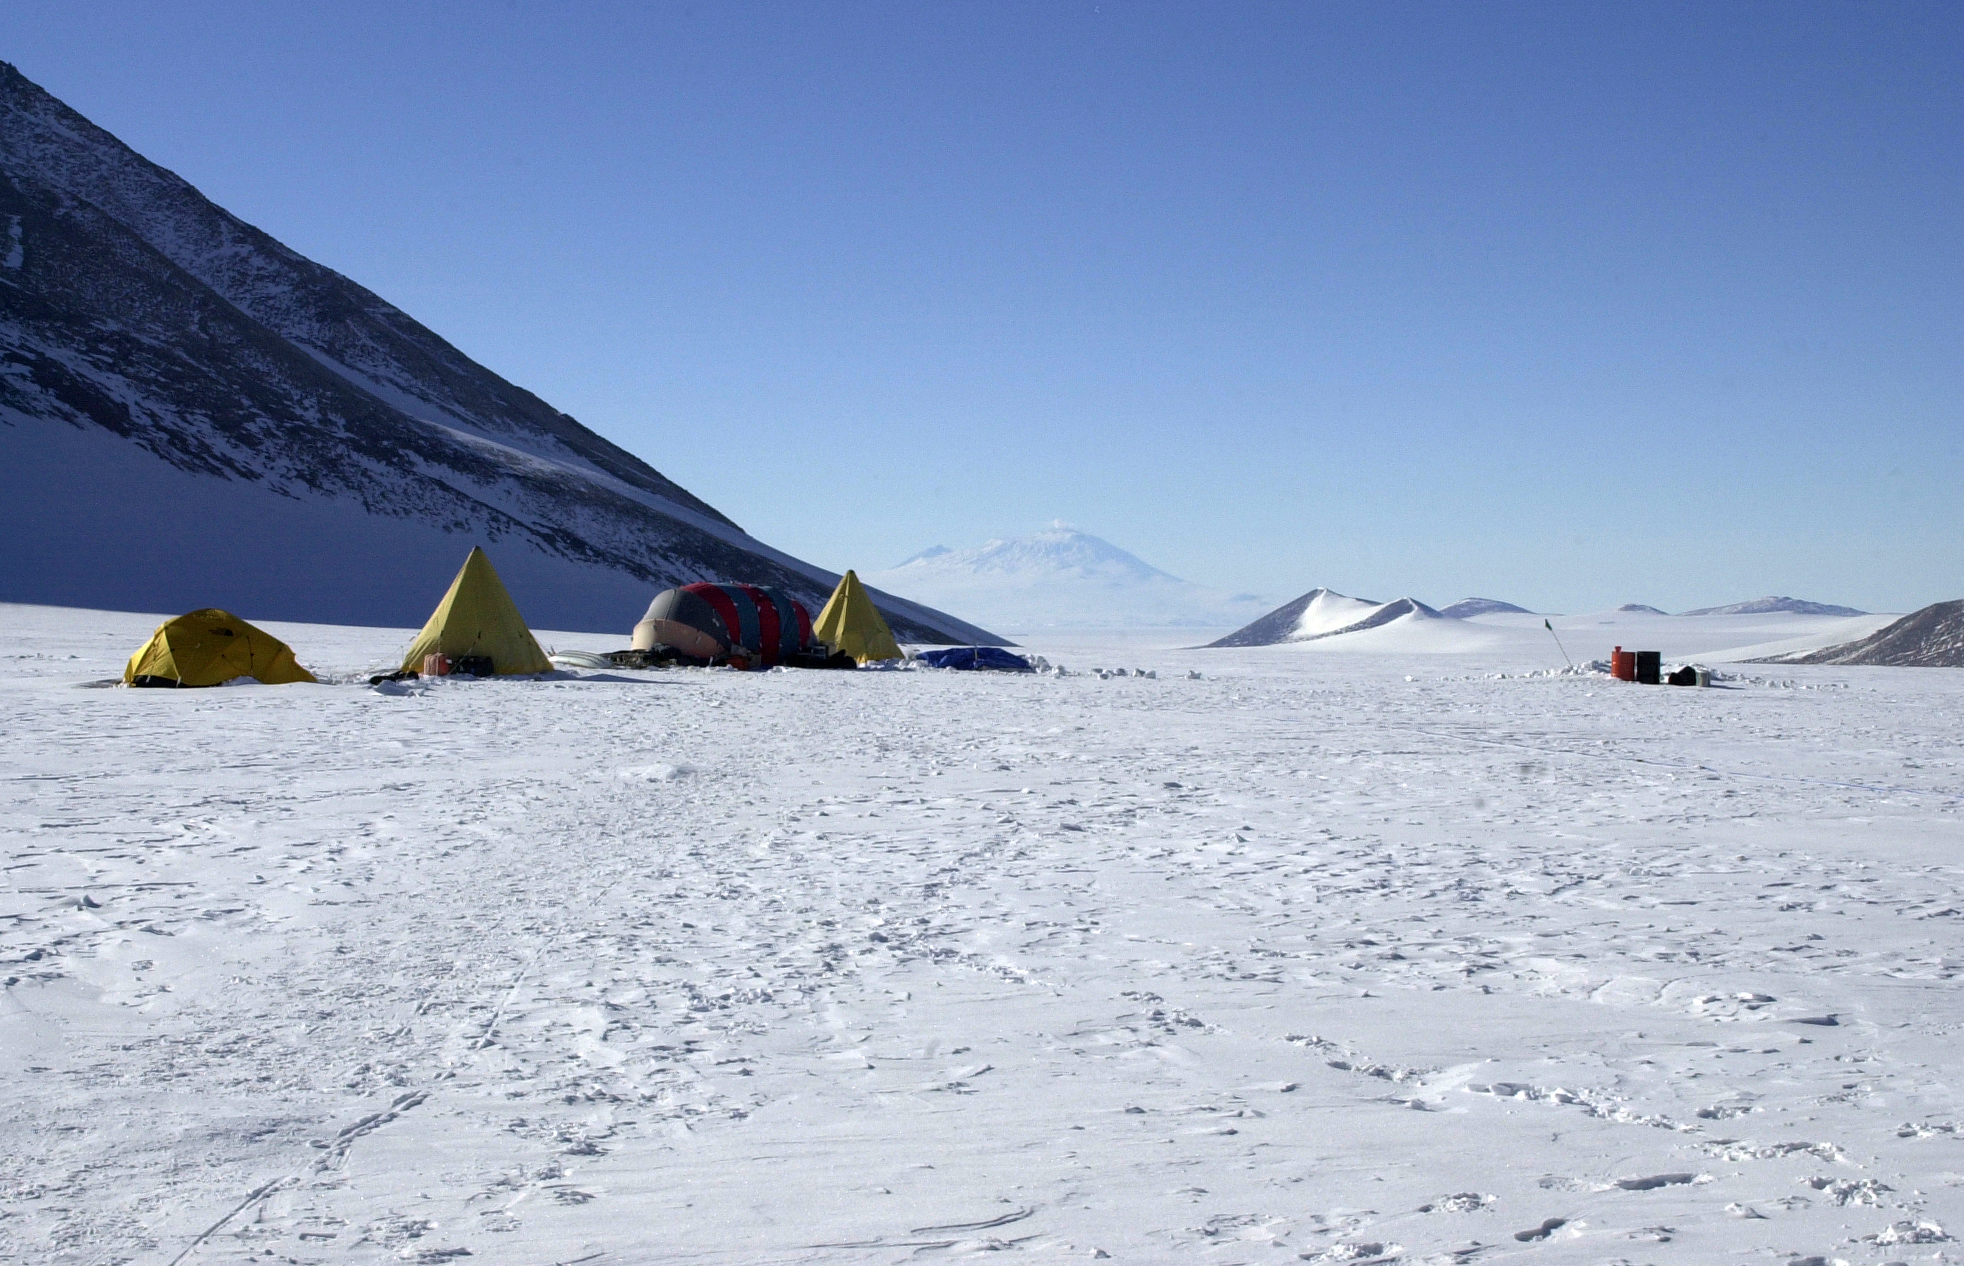 A small group of tents sits in the snow.